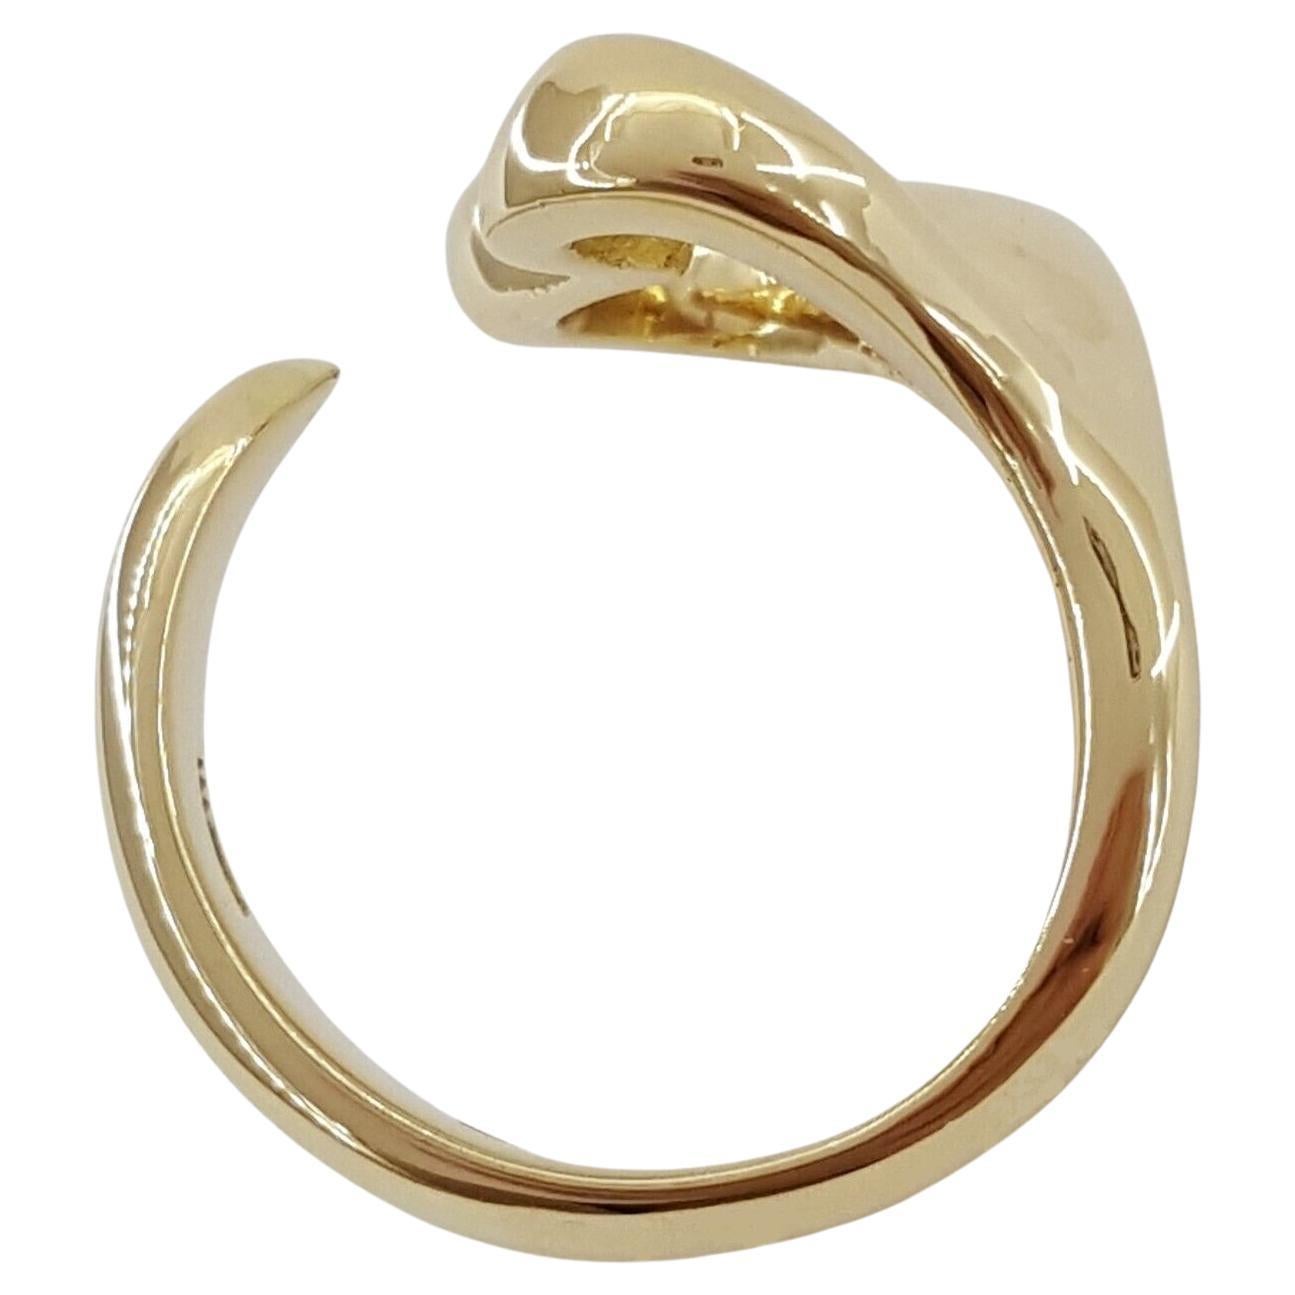 Timeless Tiffany & Co. Elsa Peretti© 18K Yellow Gold Large Open Heart Ring.

This exquisite piece of jewelry is a celebration of love and elegance, crafted by the renowned designer Elsa Peretti© for Tiffany & Co.

Stunning Design: Adorn your finger